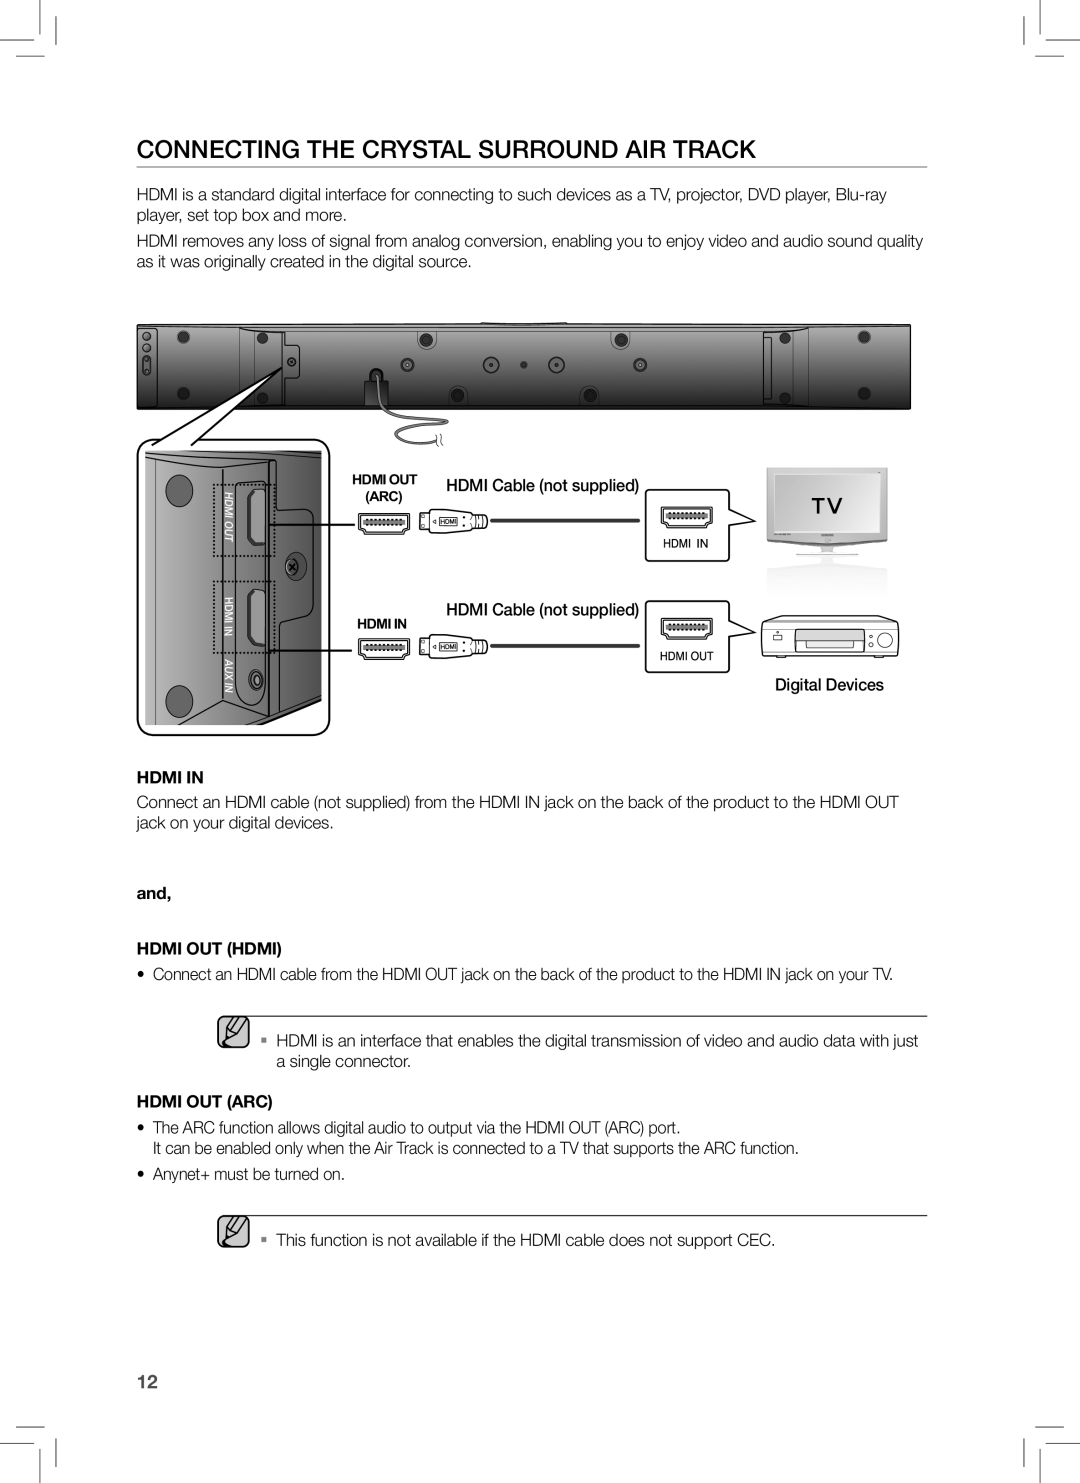 Samsung HW-E350 user manual Connecting The Crystal Surround Air Track, Hdmi In, and HDMI OUT HDMI, Hdmi Out Arc 